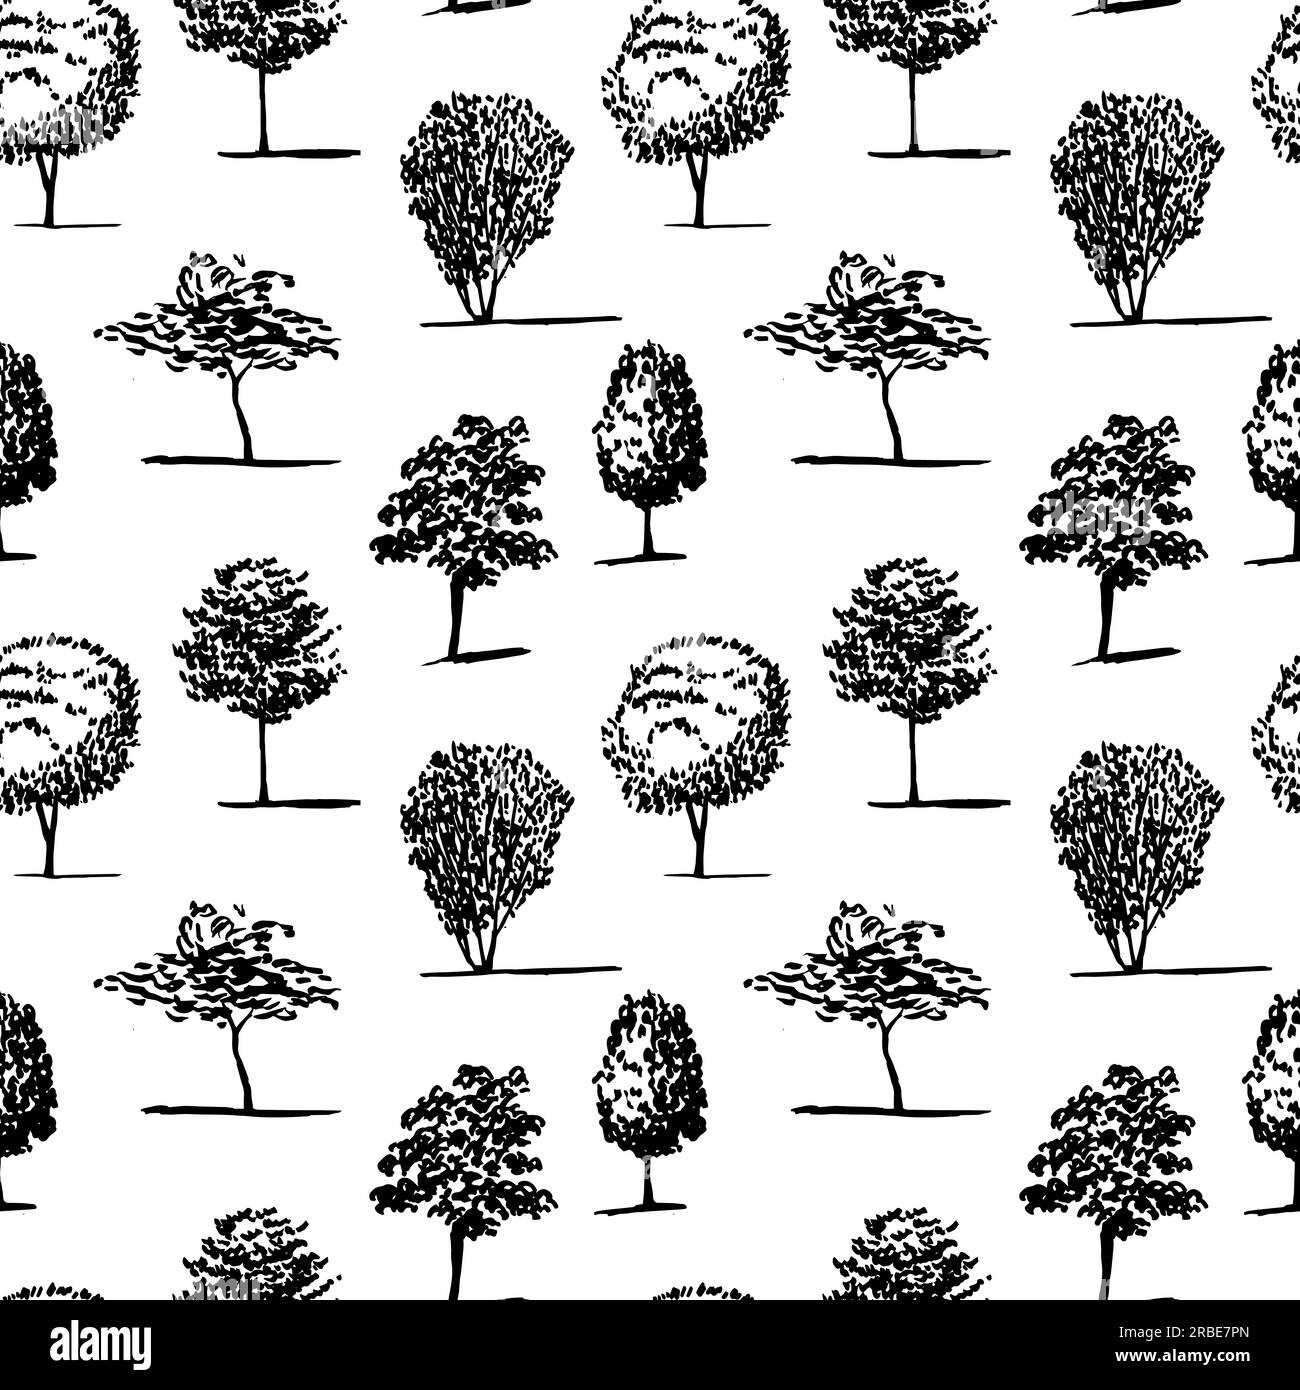 Vector different kinds of trees semless pattern Stock Vector